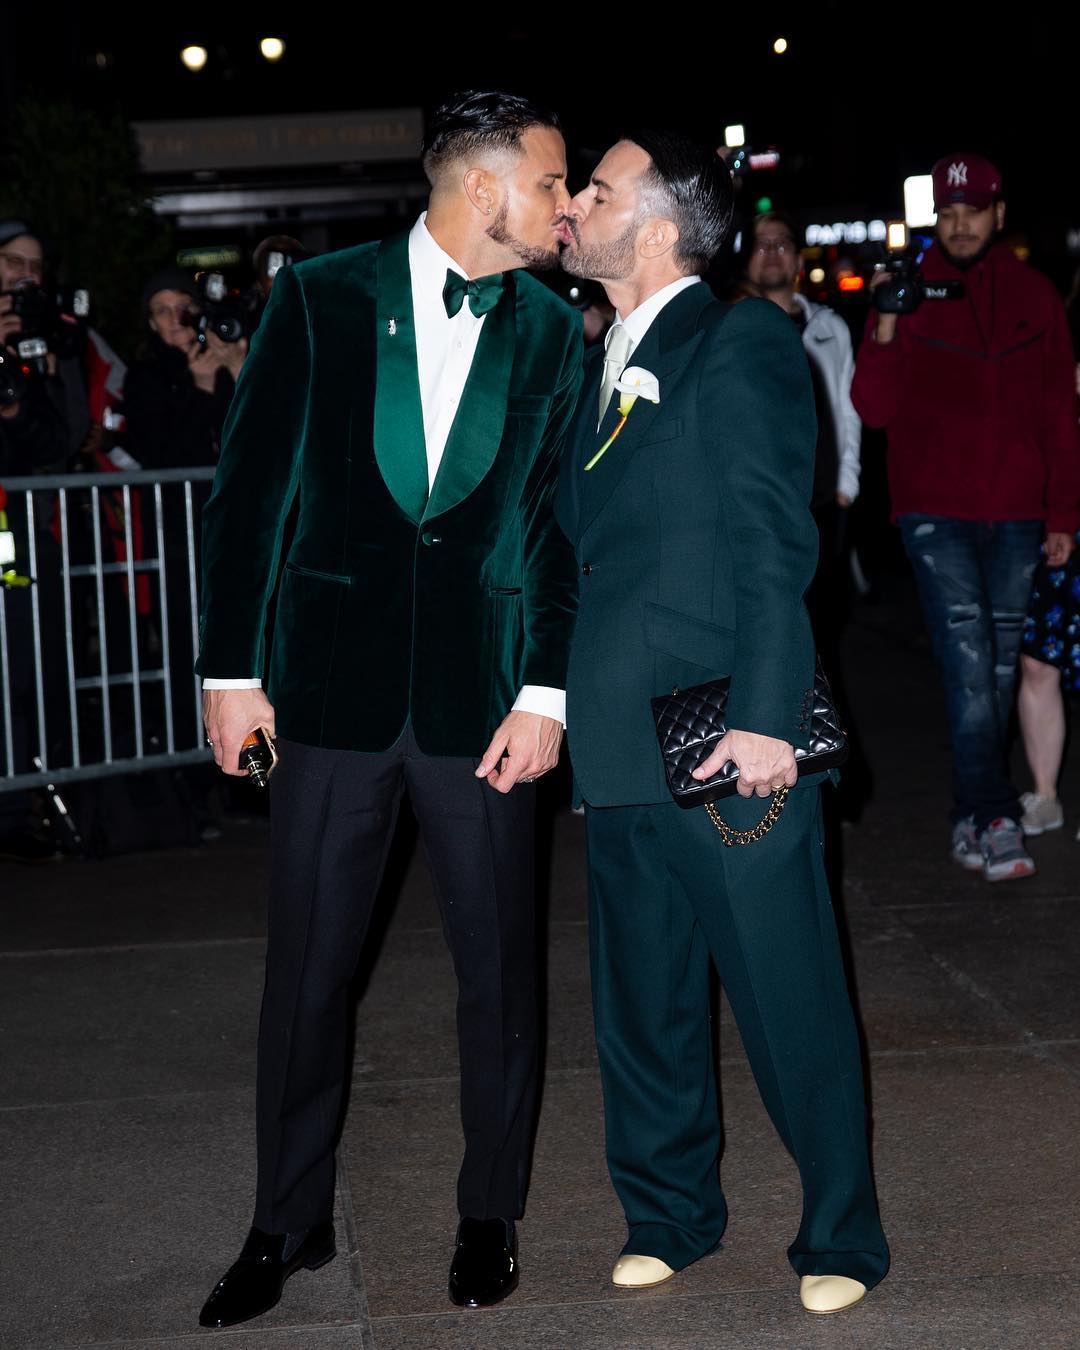 Marc Jacobs Gets Married to Char Defrancesco in Intimate New York Wedding